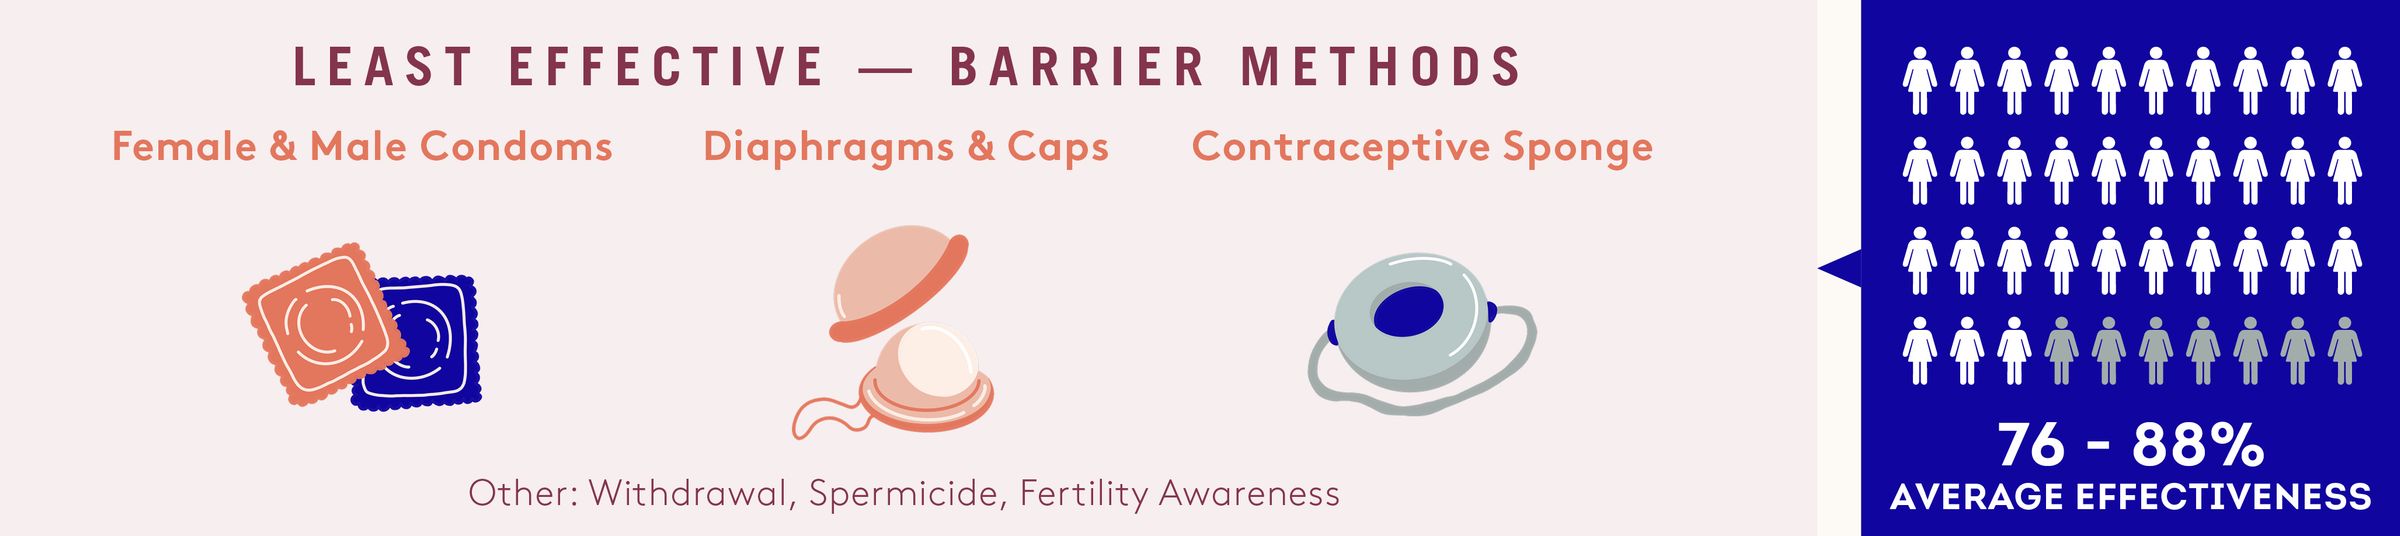 barrier methods of birth control